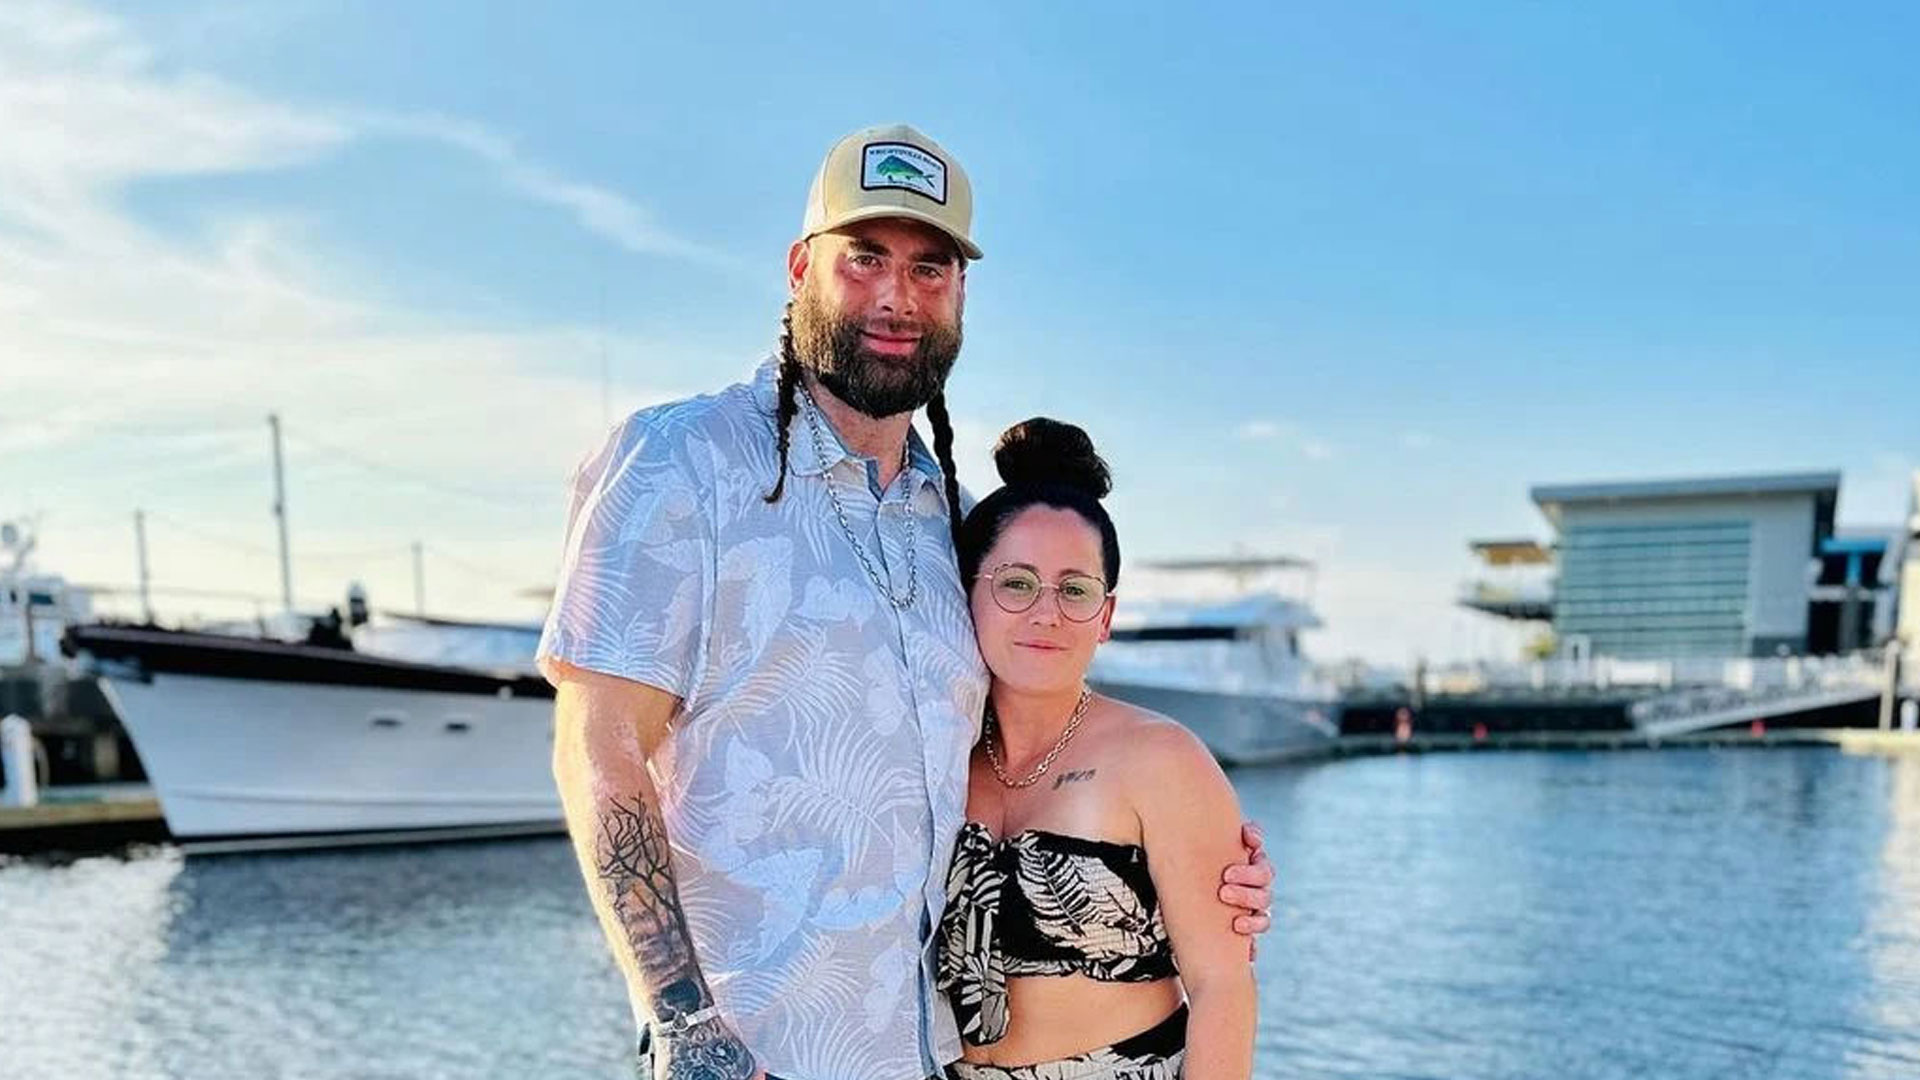 Teen Mom Jenelle Evans ‘hires private investigator’ to watch ex David Eason as he lives on their boat during nasty split